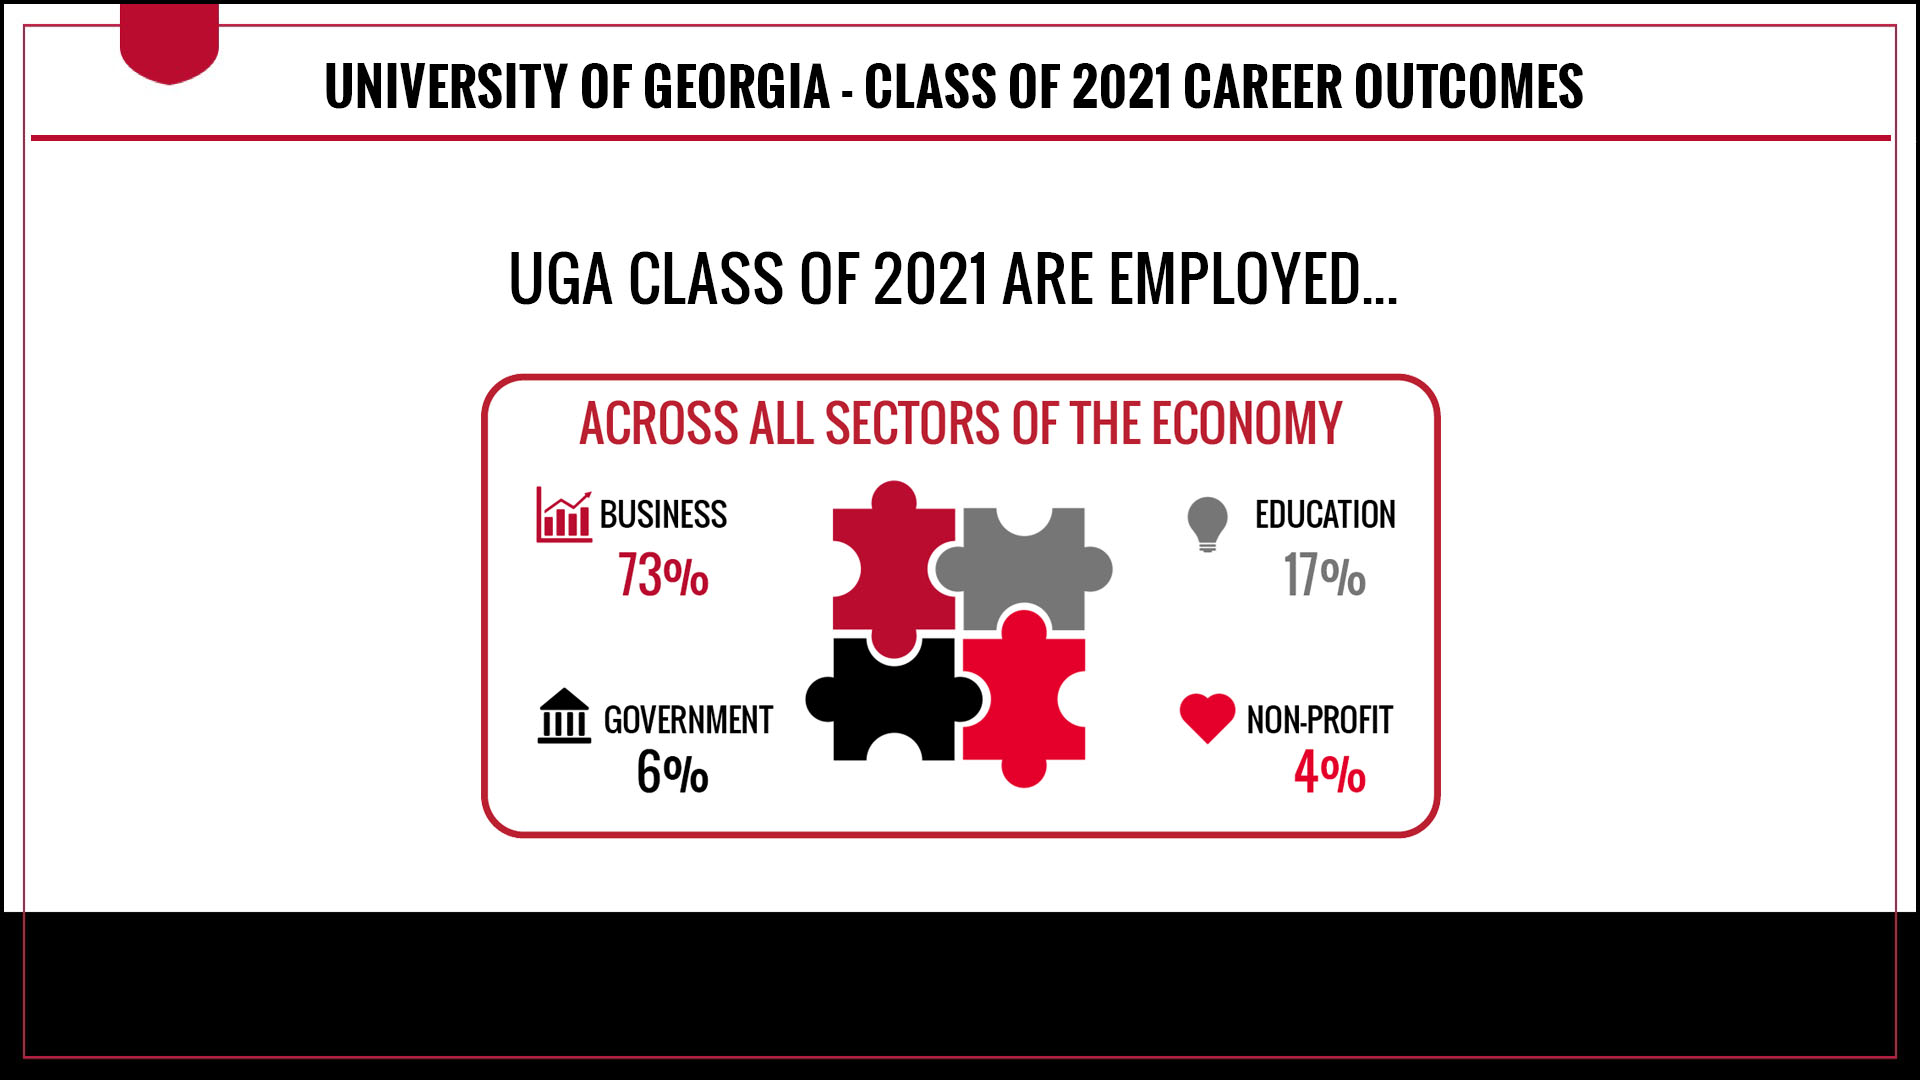 UGA Class of 2021 graduates are working across all sectors of the economy. 73 percent of full-time employed graduates are working in the business sector, 17 percent are working in the education sector, 6 percent are working in the government sector and 4 percent are working in the non-profit sector.